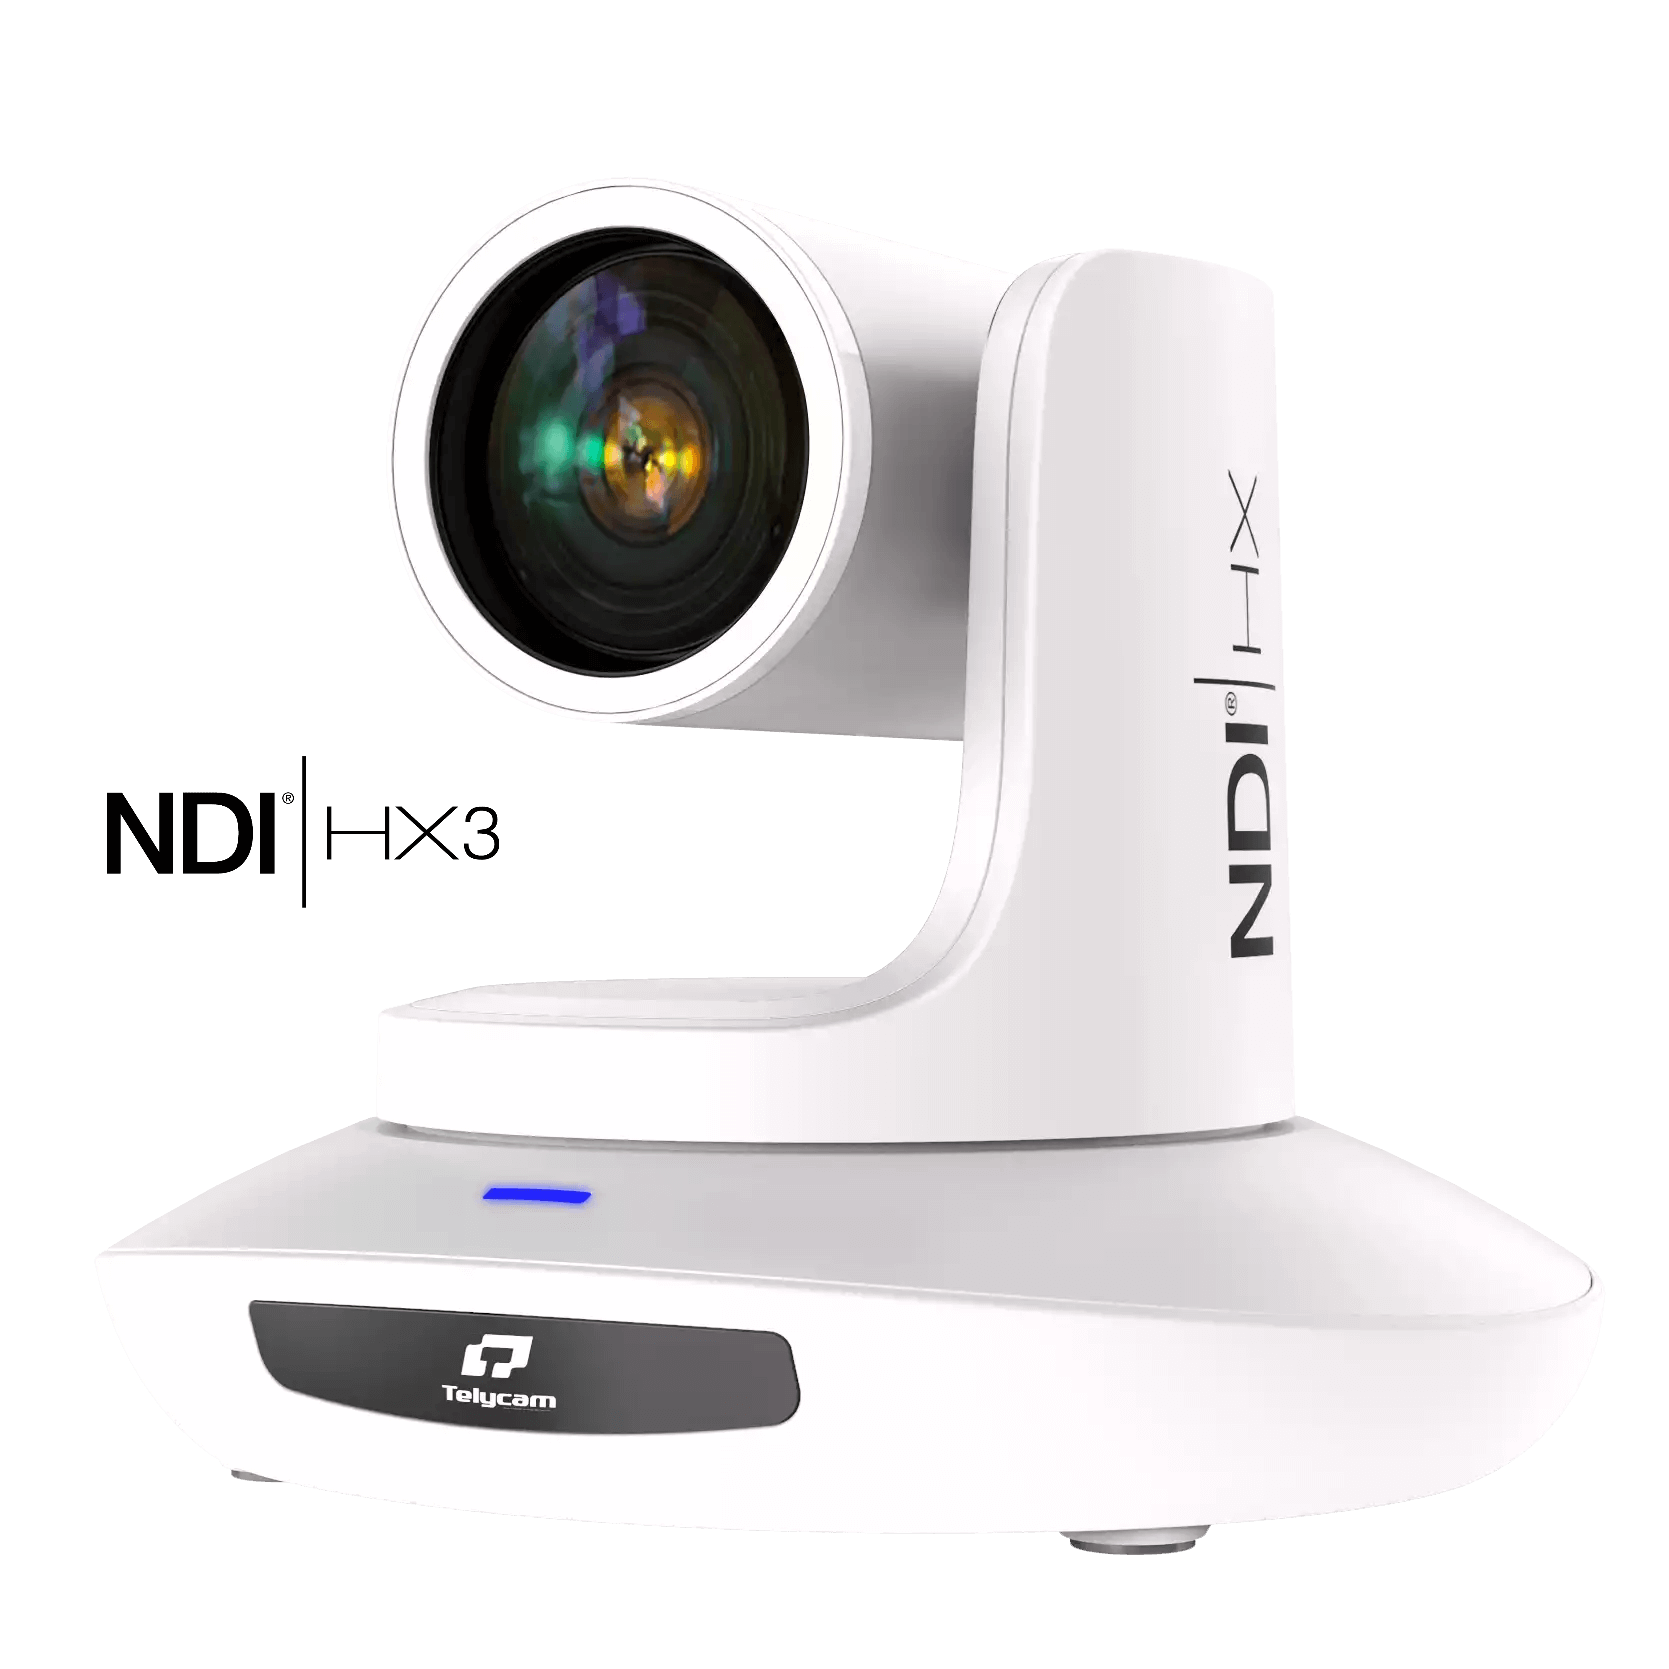 Telycam NDI Camera for online courses